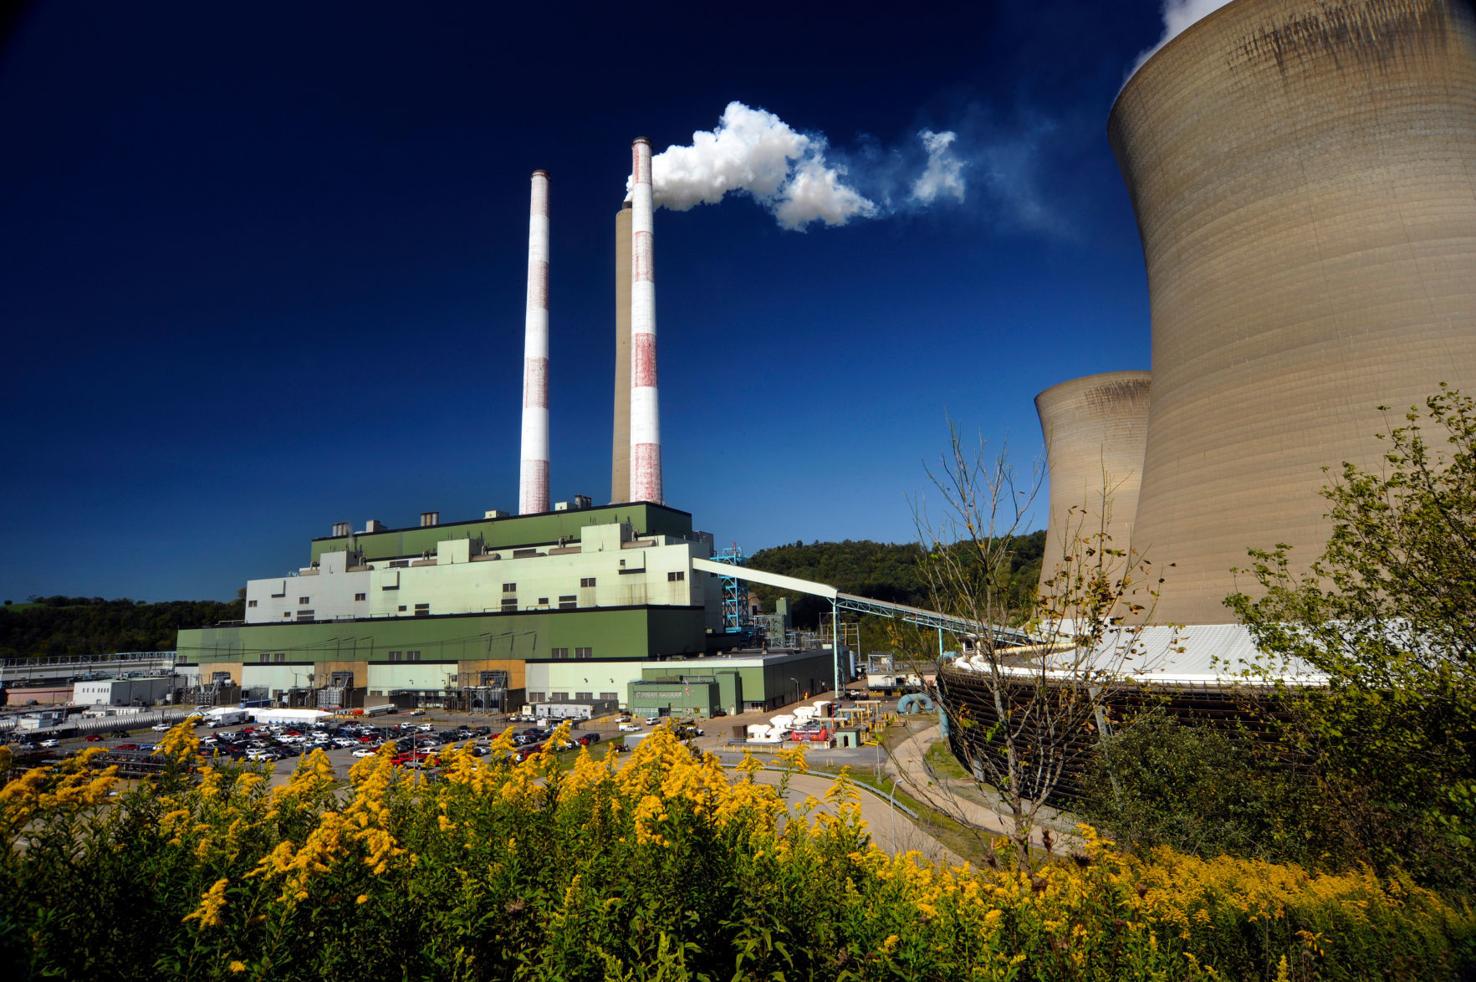 Mon Power’s Harrison Plant Tops EPA’s Toxic Release List Statewide